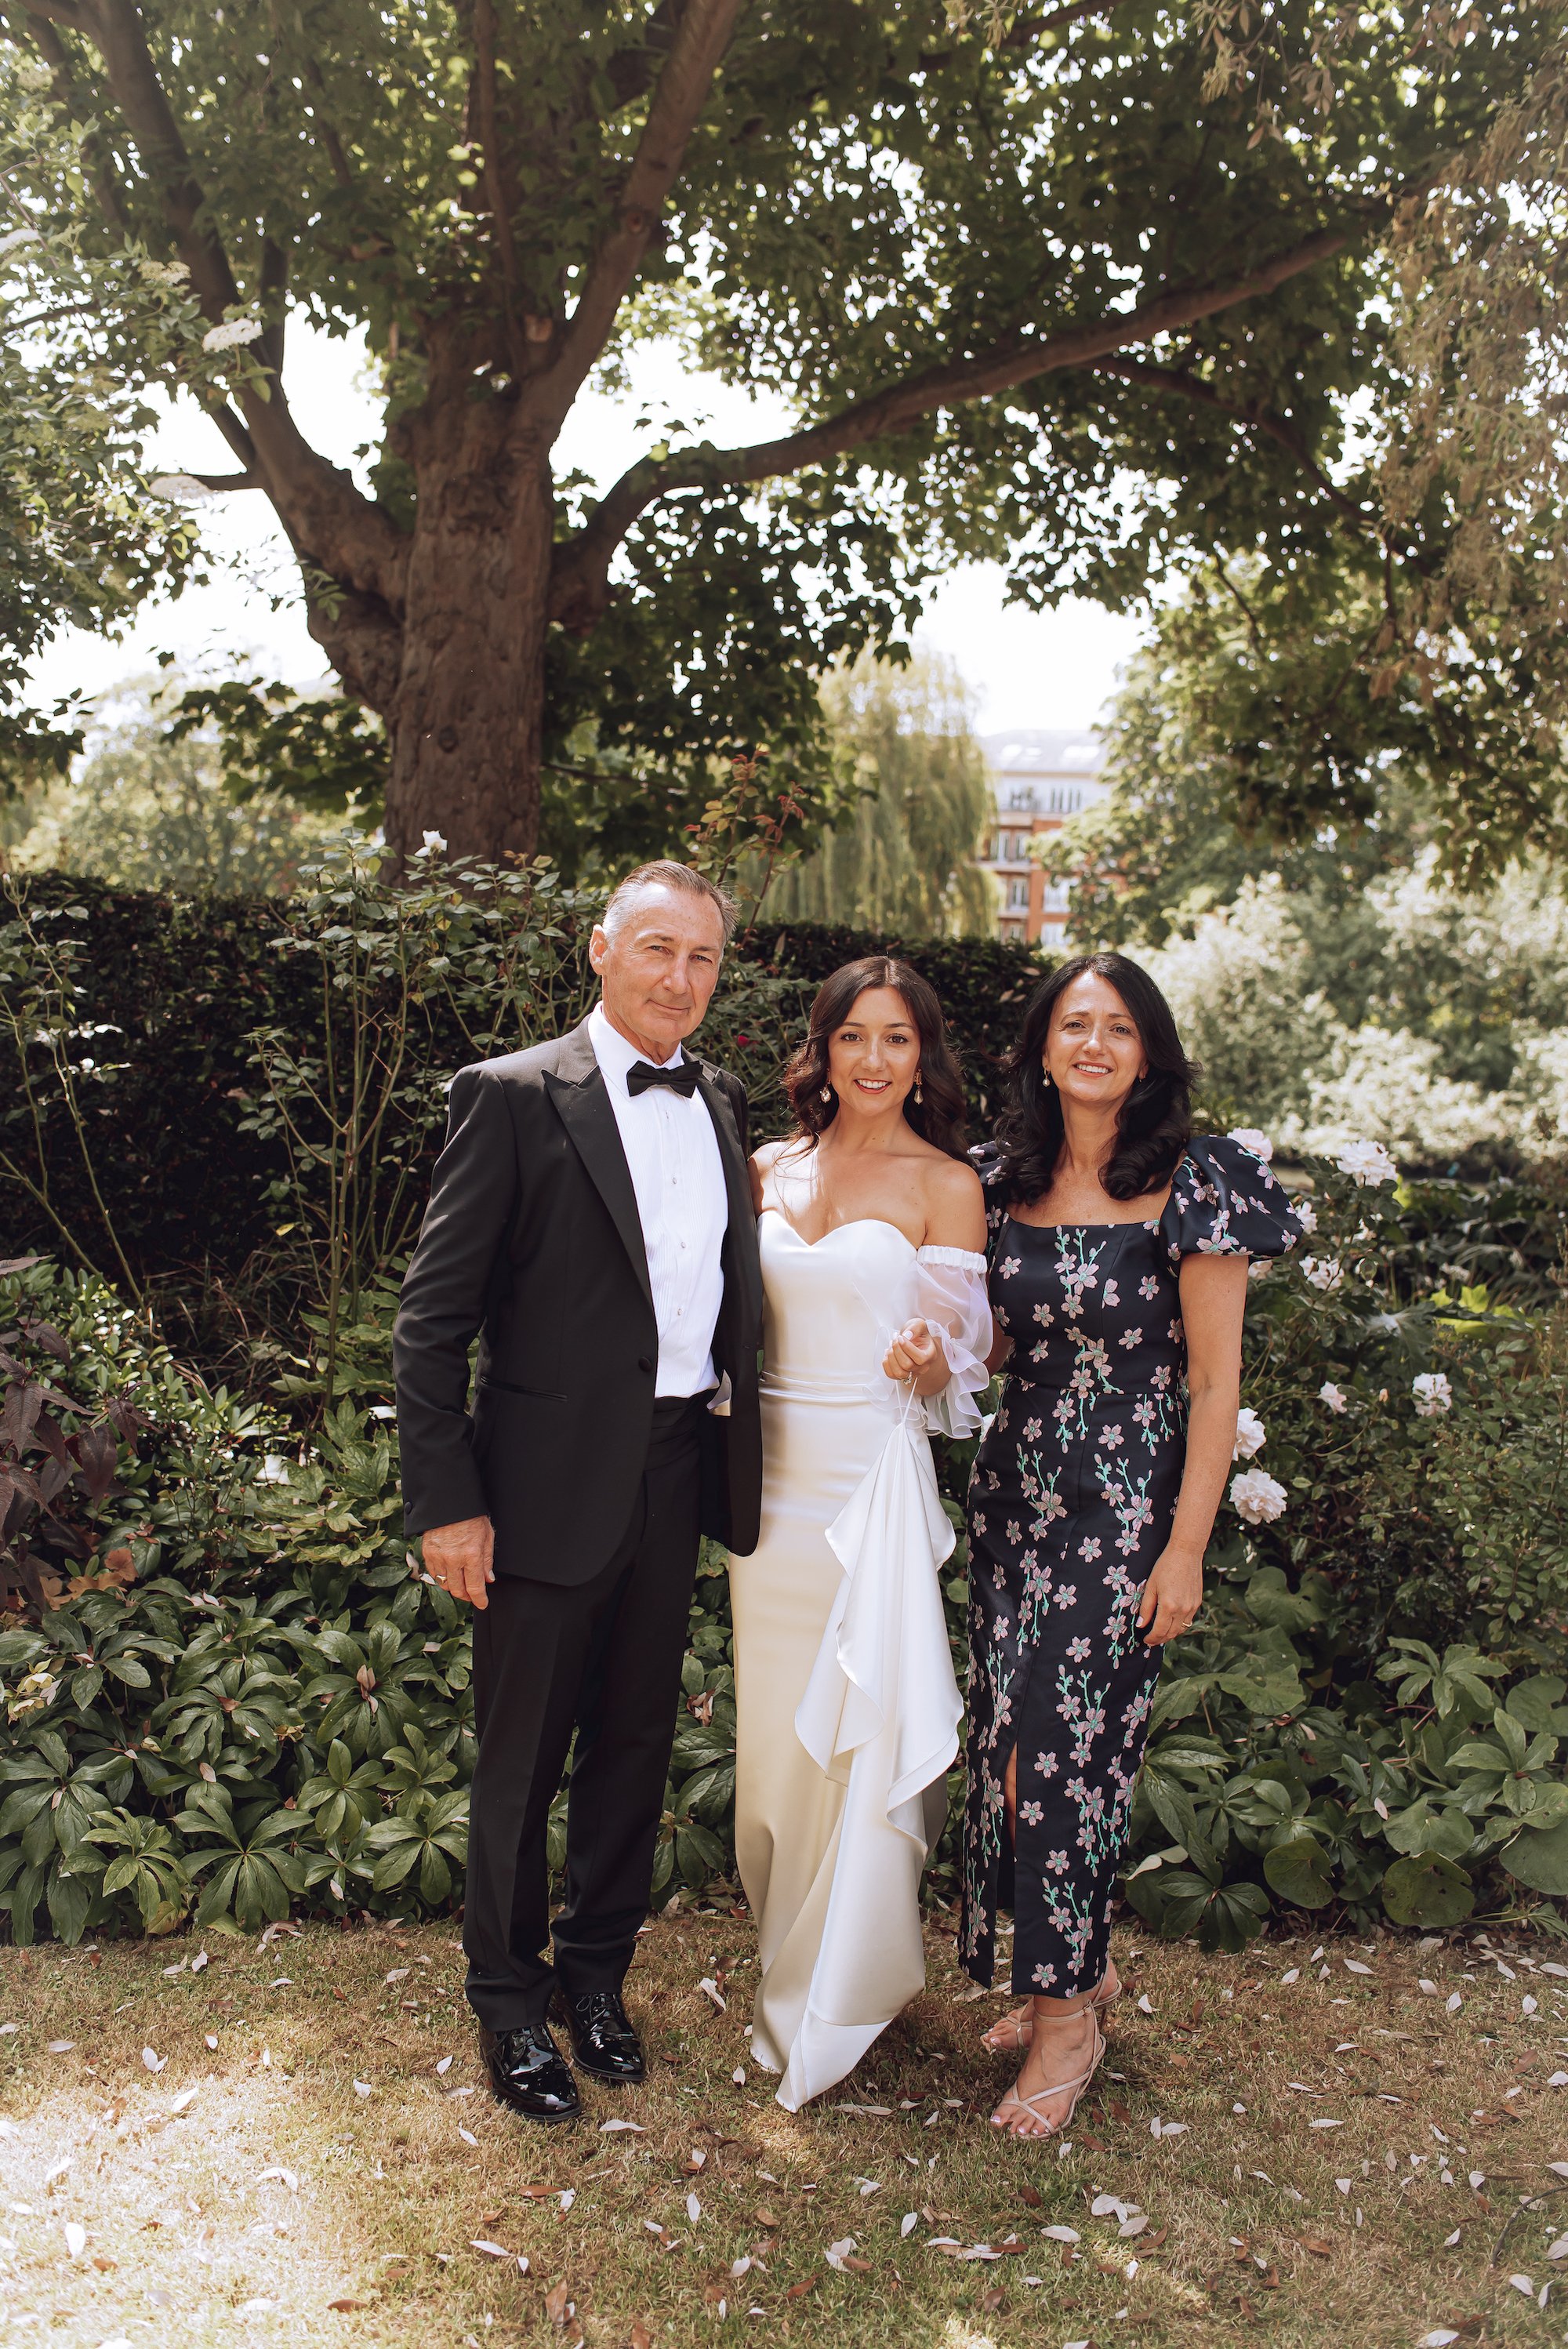 Beautiful bride Sophie-Rose wore the Dayton wedding dress and Calypso sleeves by Halfpenny London